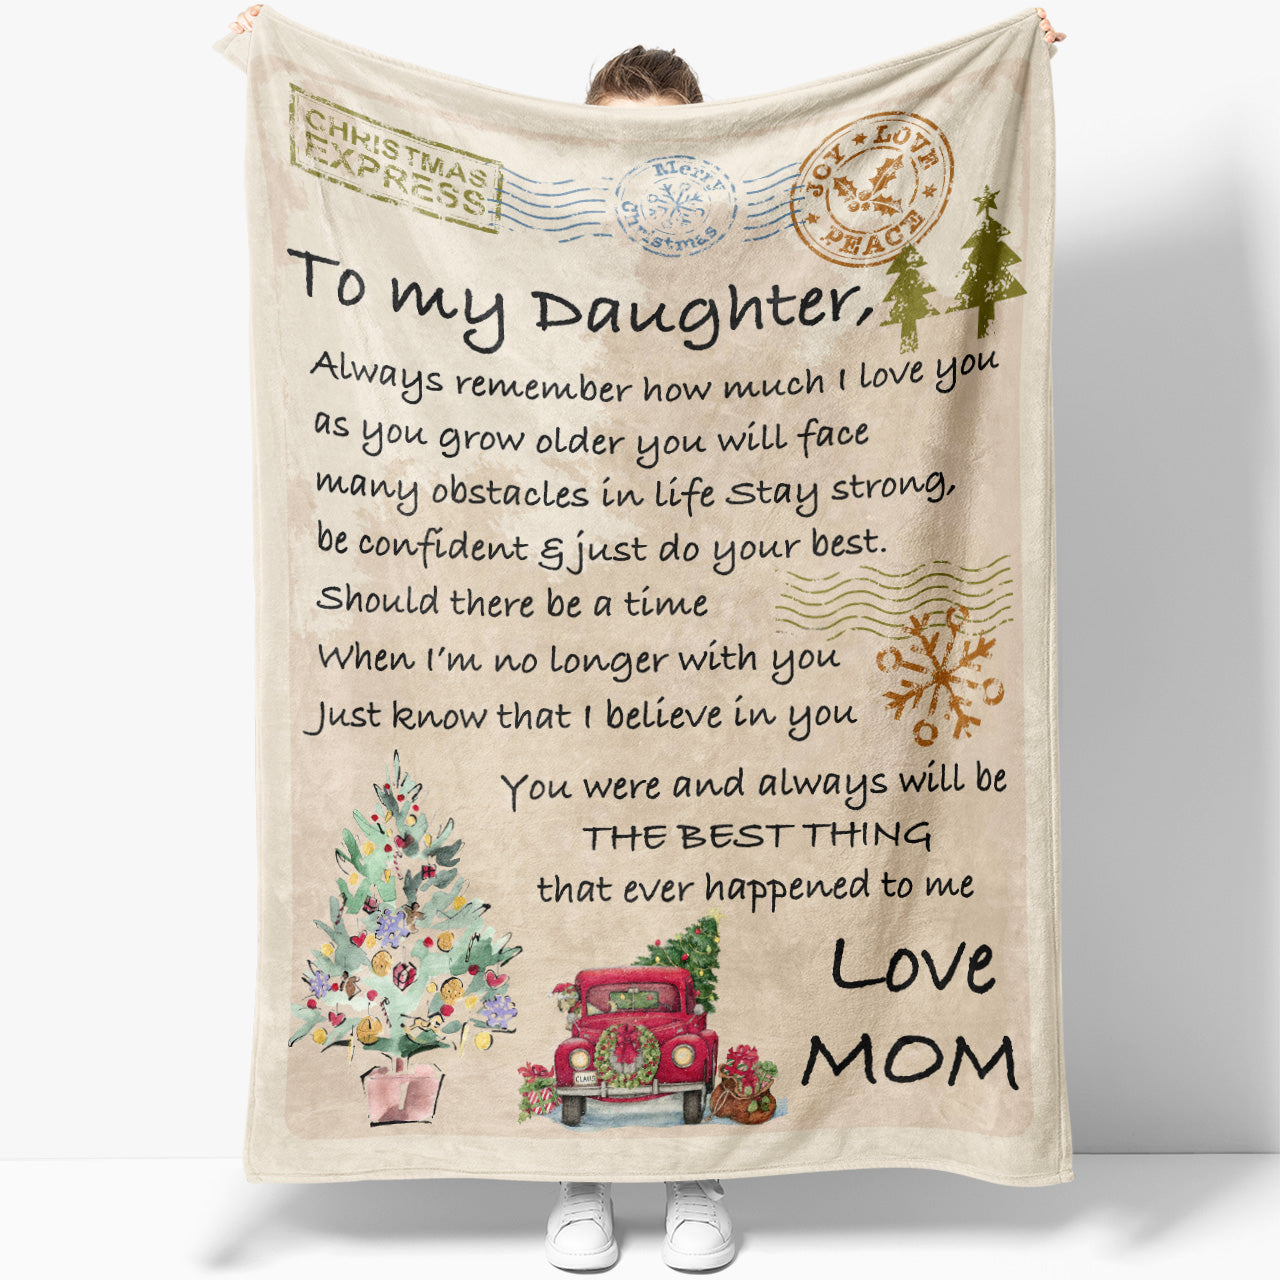 Gifts for Mom, Mom Birthday Gifts, Christmas Blanket Gifts for Mom from  Daughter, Mom Gifts, I Love You Mom Blanket Gifts for Mom, Gift for Mom  from